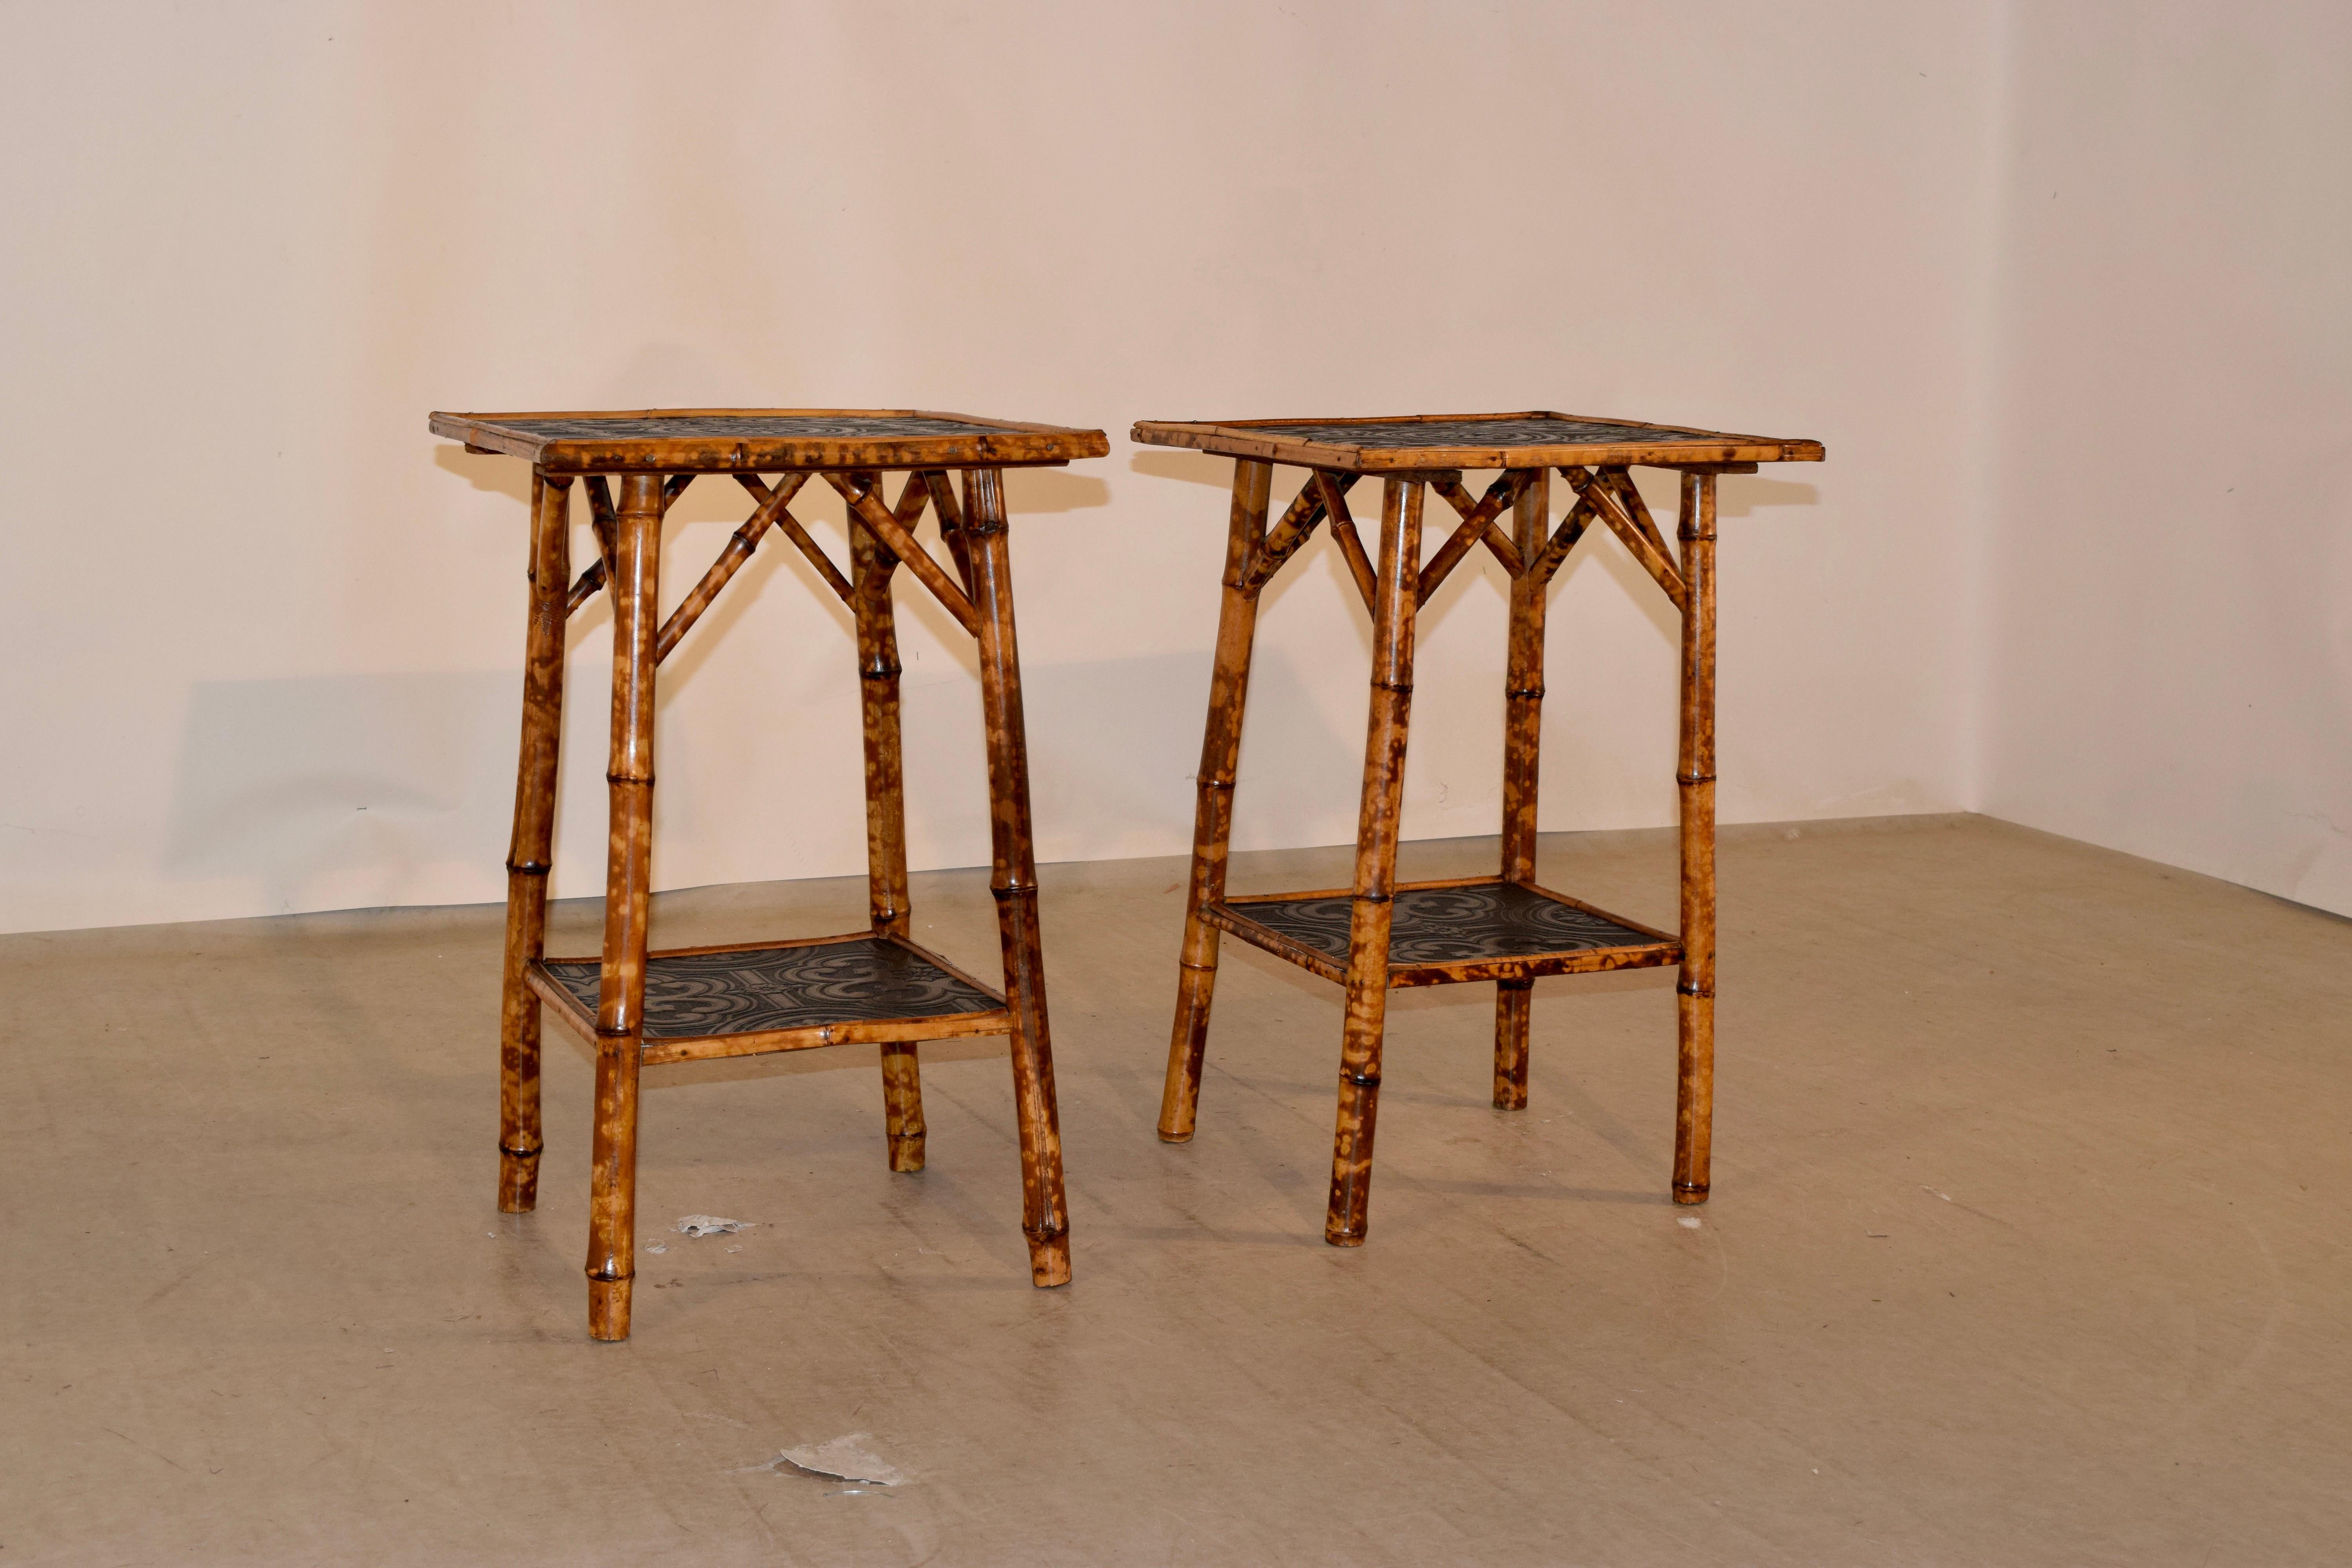 Set of two 19th century bamboo side tables from France with navy painted wallpaper on tops and lower shelves. The table is made from tortoise bamboo. The second table measures 17 W x 17.38 D x 26.63 H.